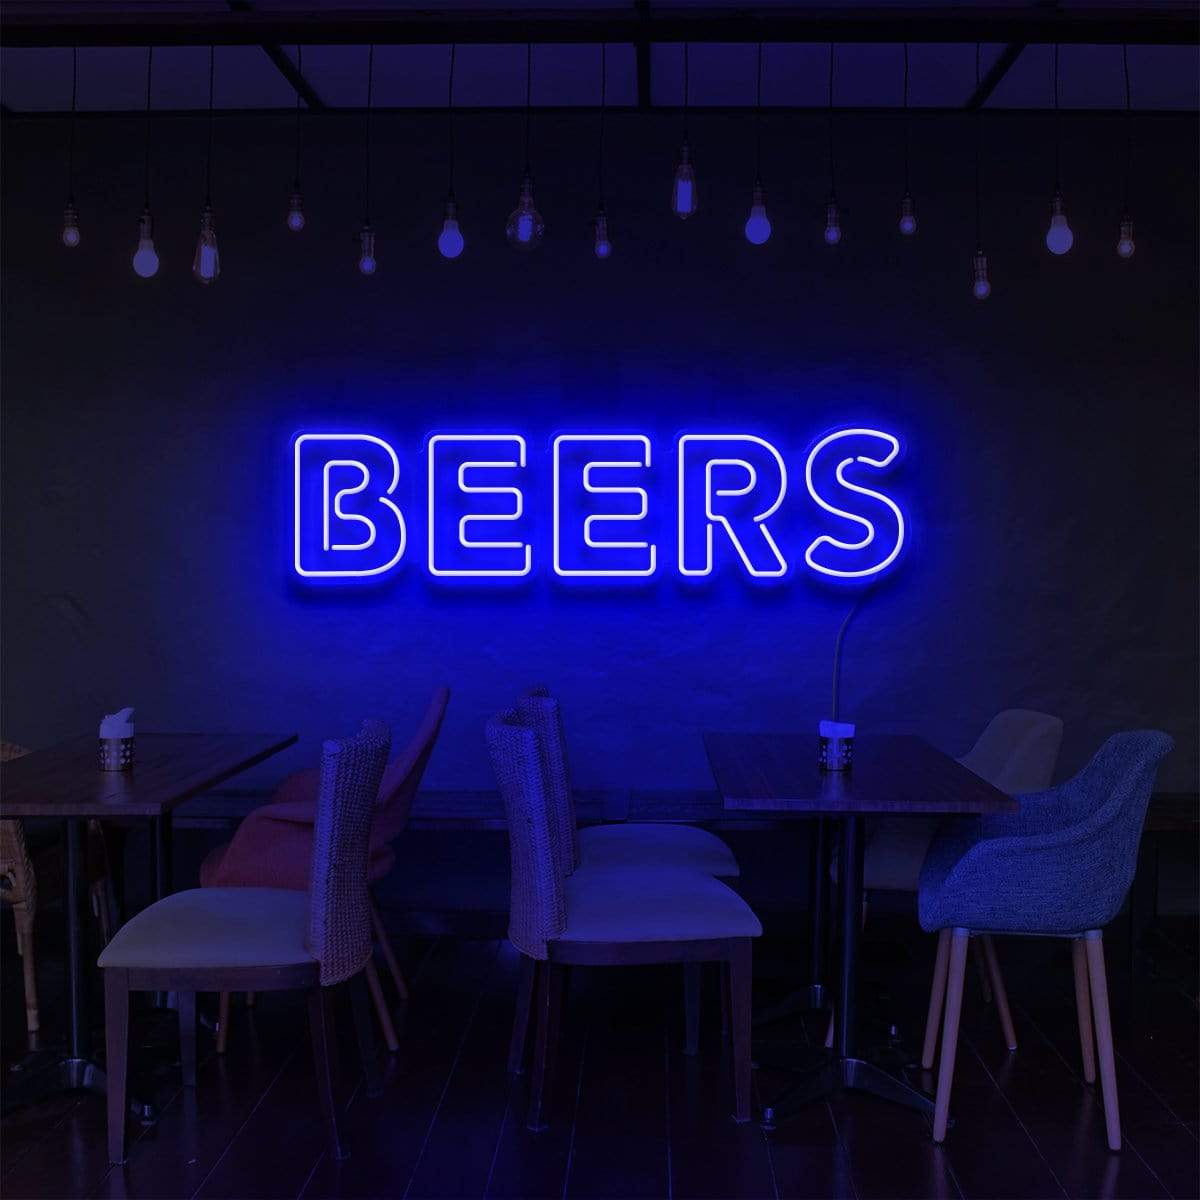 "Beers" Neon Sign for Bars & Restaurants 60cm (2ft) / Blue / LED Neon by Neon Icons